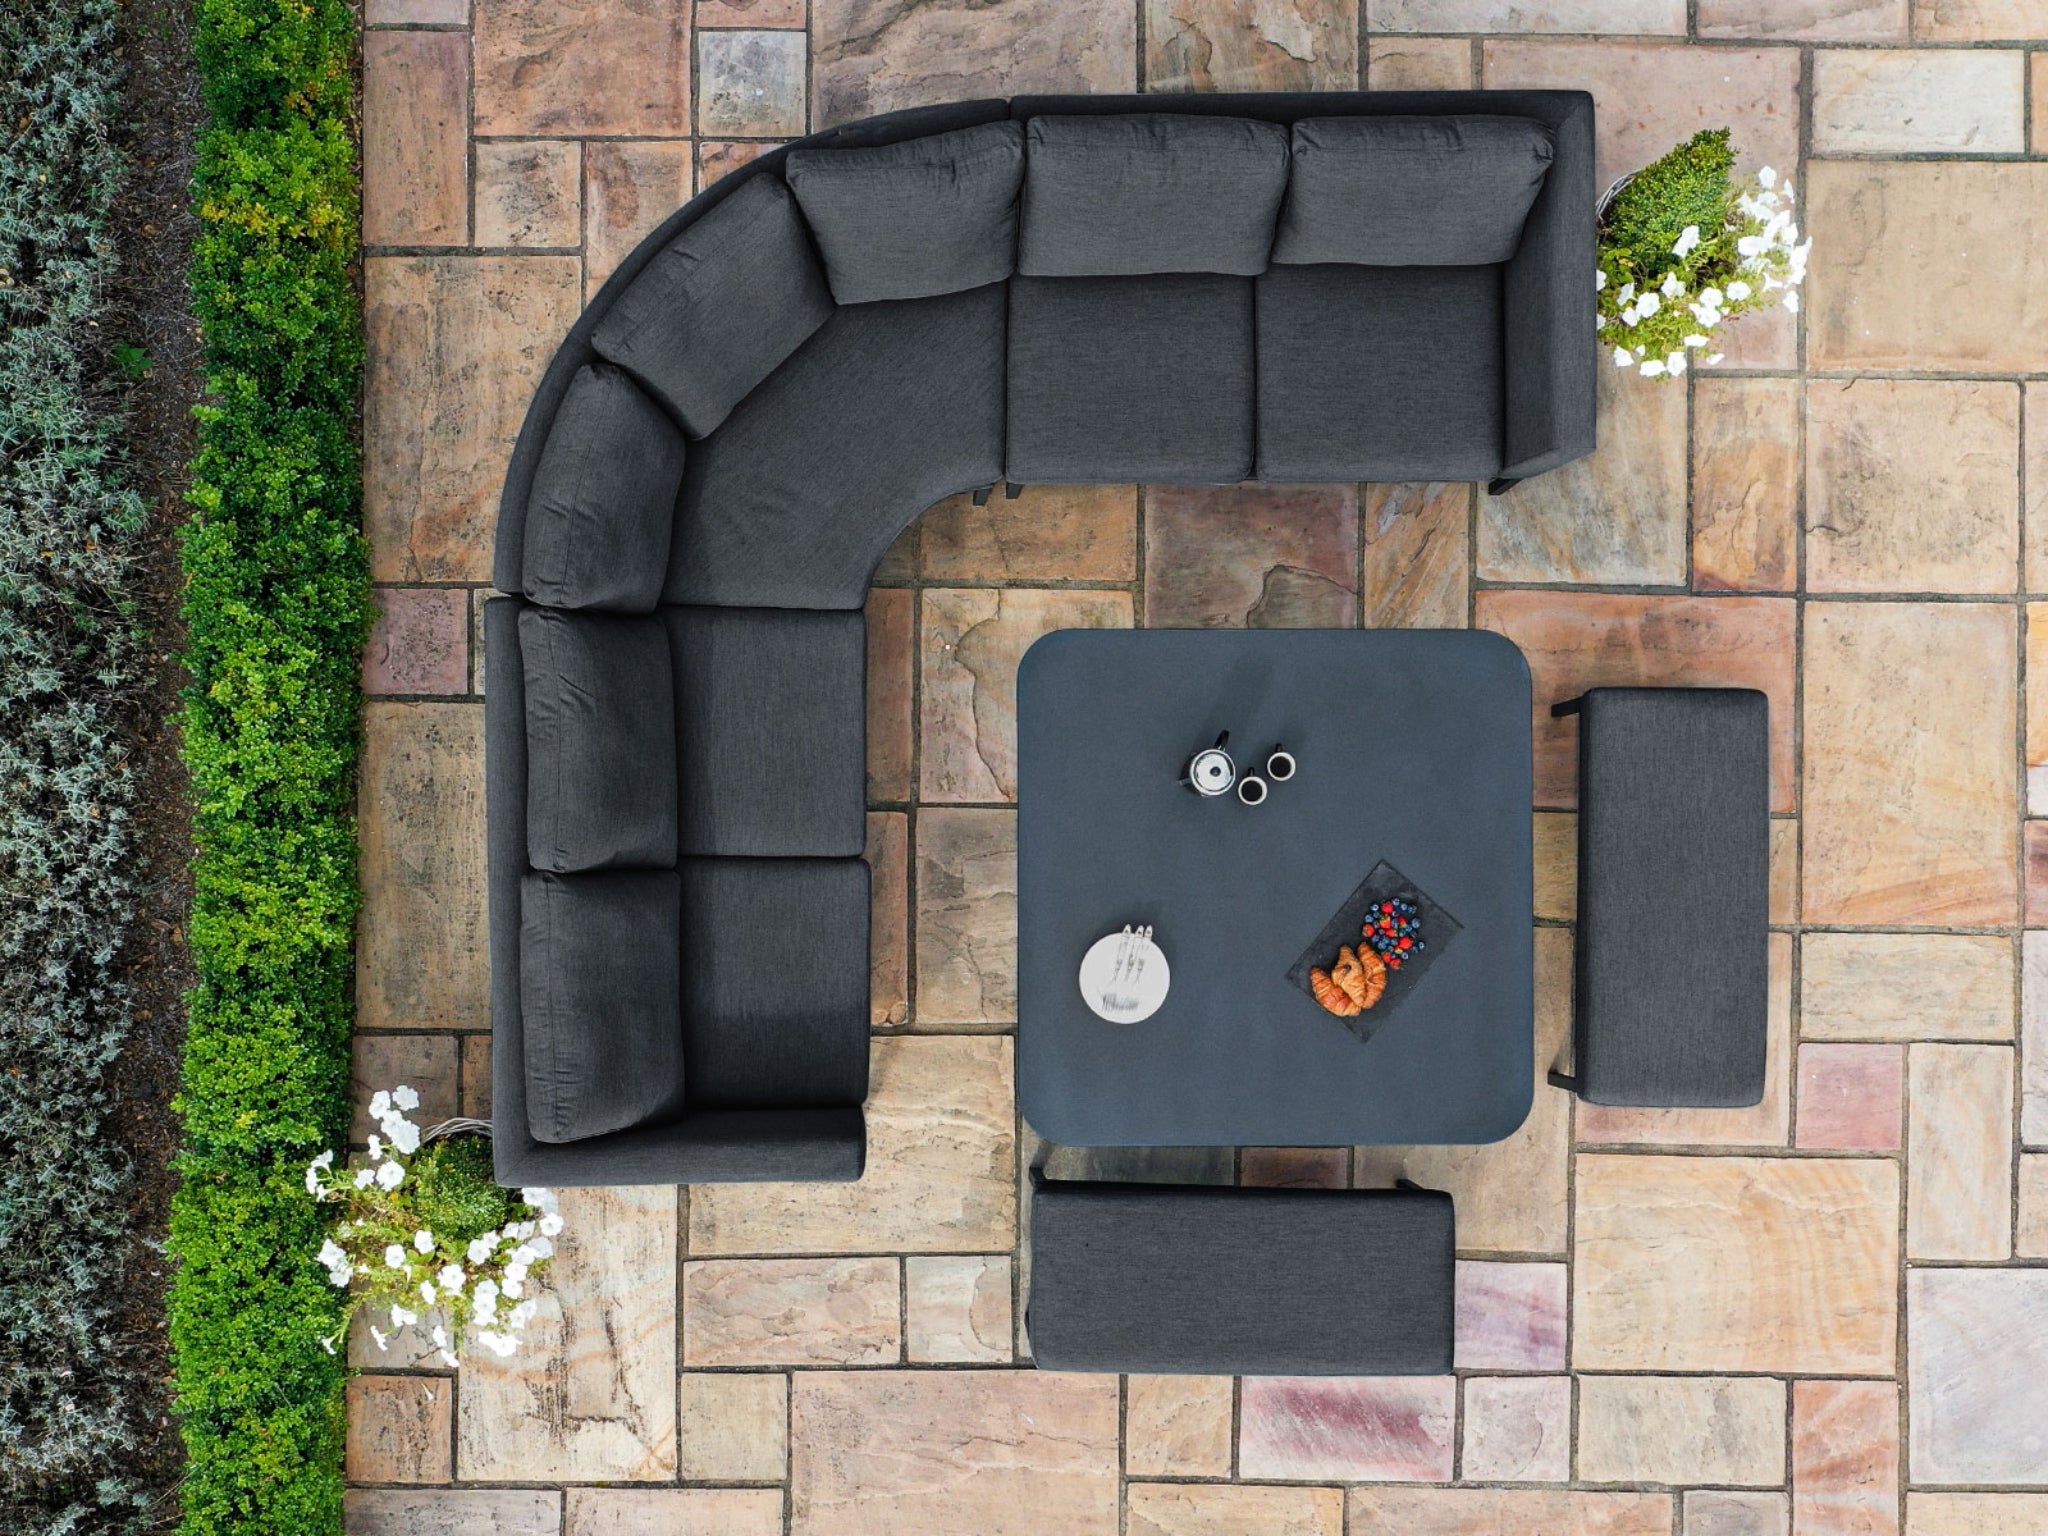 SIMPO Pulse 6-Piece Outdoor Modular Lounge Setting (Square) — Charcoal